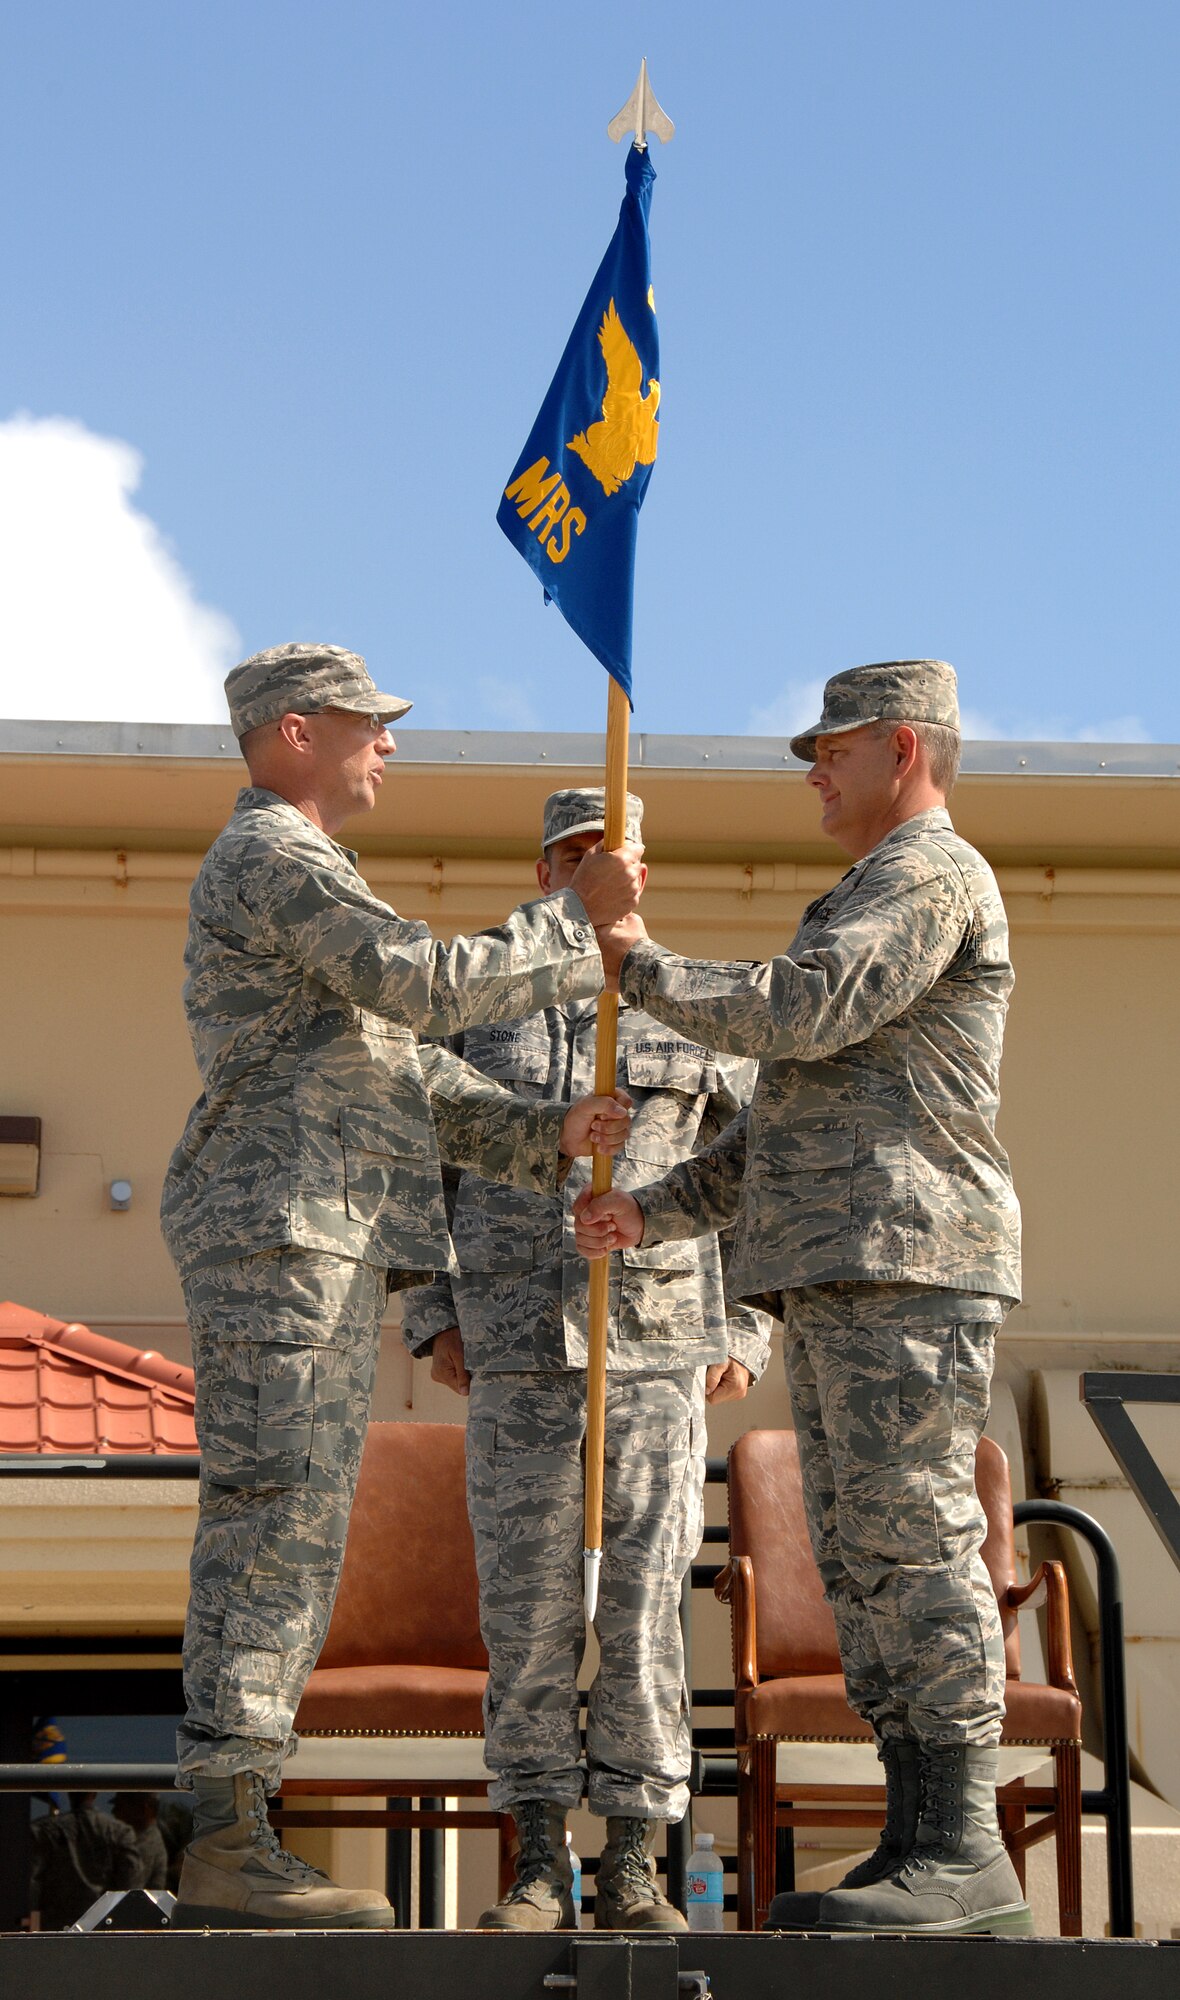 Presiding Officer Col. Kevin Kersh presents the 36th Mobility Response Squadron flag to Lt. Col. Joe Hayslett, giving him command of the 36th MRS during the change of command ceremony here June 27. (U.S. Air Force photo by Airman 1st Class Courtney Witt)